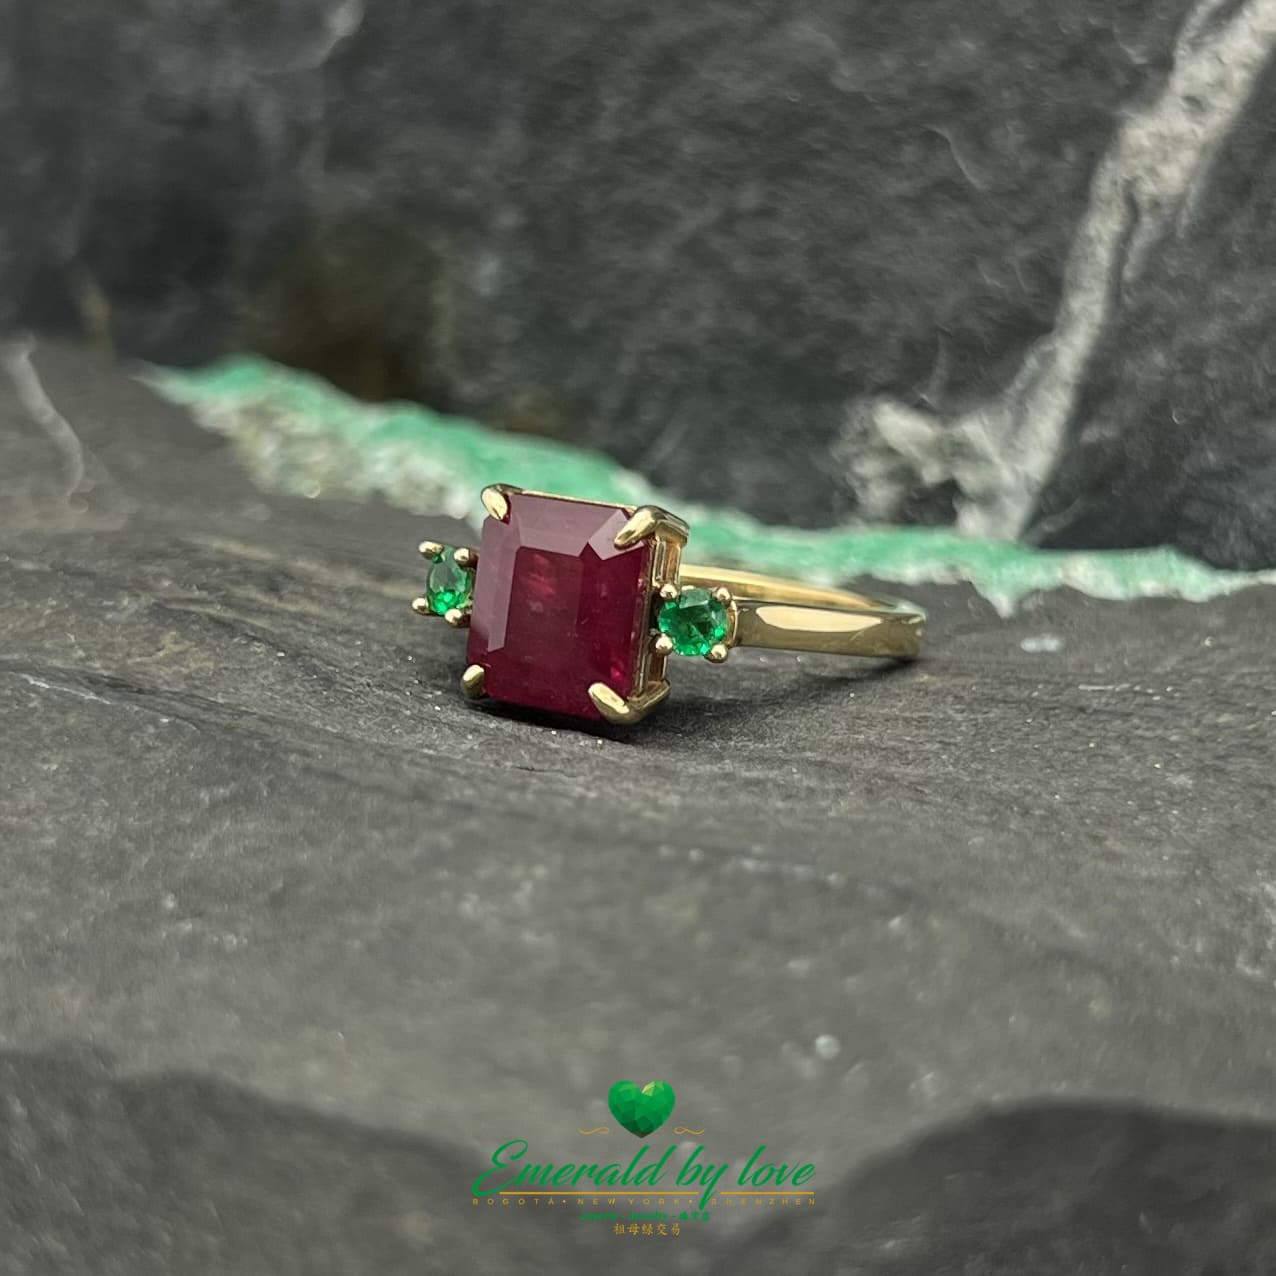 Royal Radiance: Yellow Gold Ring with Central Ruby and Flanking Round Emeralds